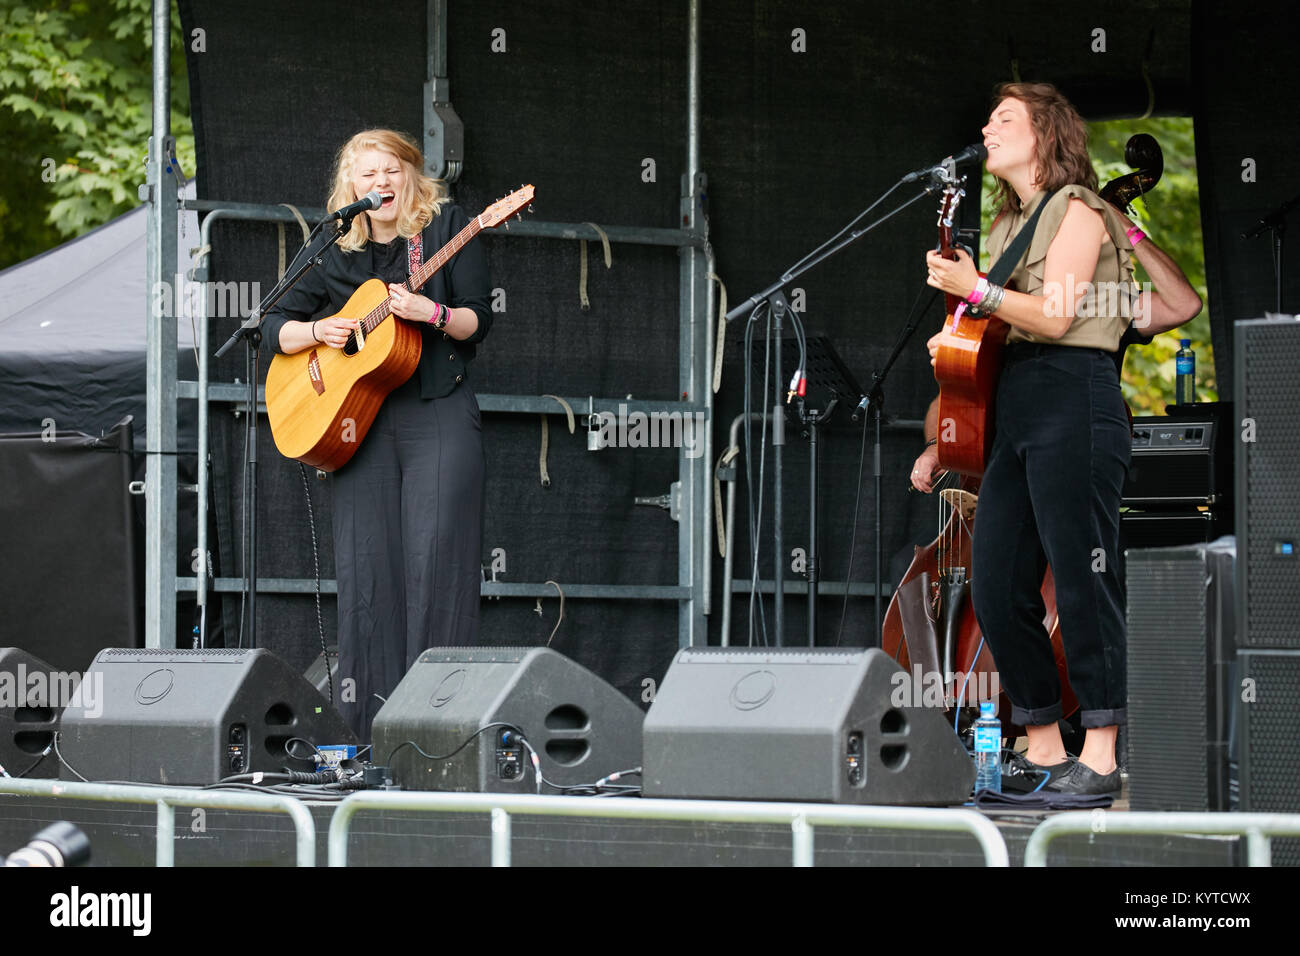 The Swedish folk duo Good Harvest Whitney performs a live concert during the Norwegian music festival Piknik i Parken in Oslo. The duo consists of the two musicians and singers Hanna Enlof (R) and Ylva Eriksson (L). Norway, 22/06 2017. Stock Photo